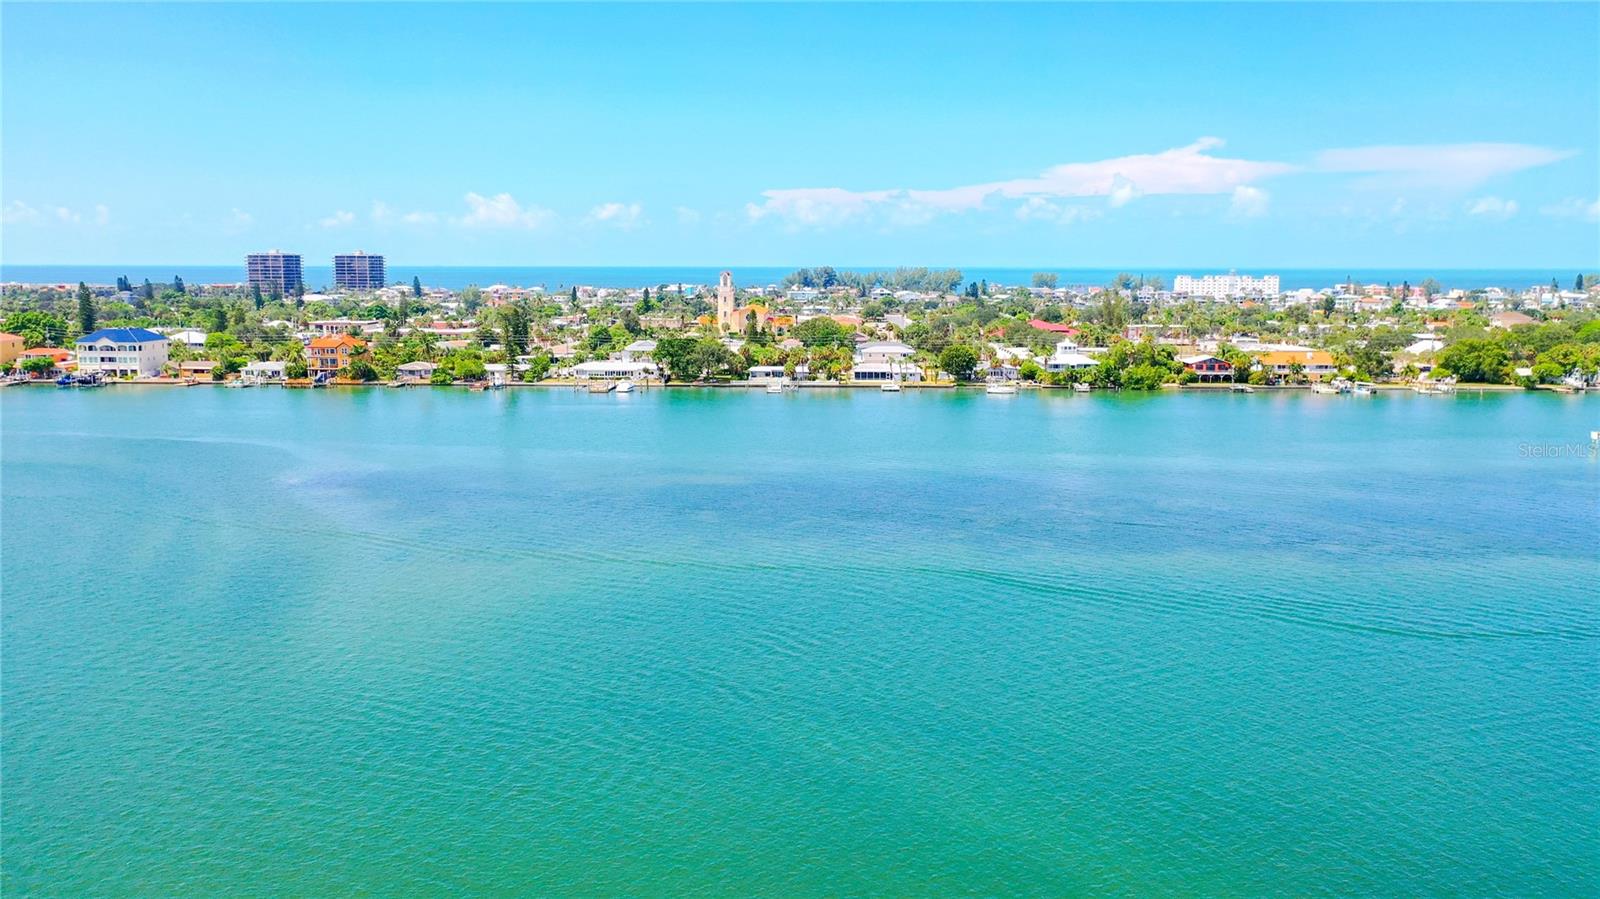 This is a aerial view looking at St. Pete Beach and the Gulf of Mexico